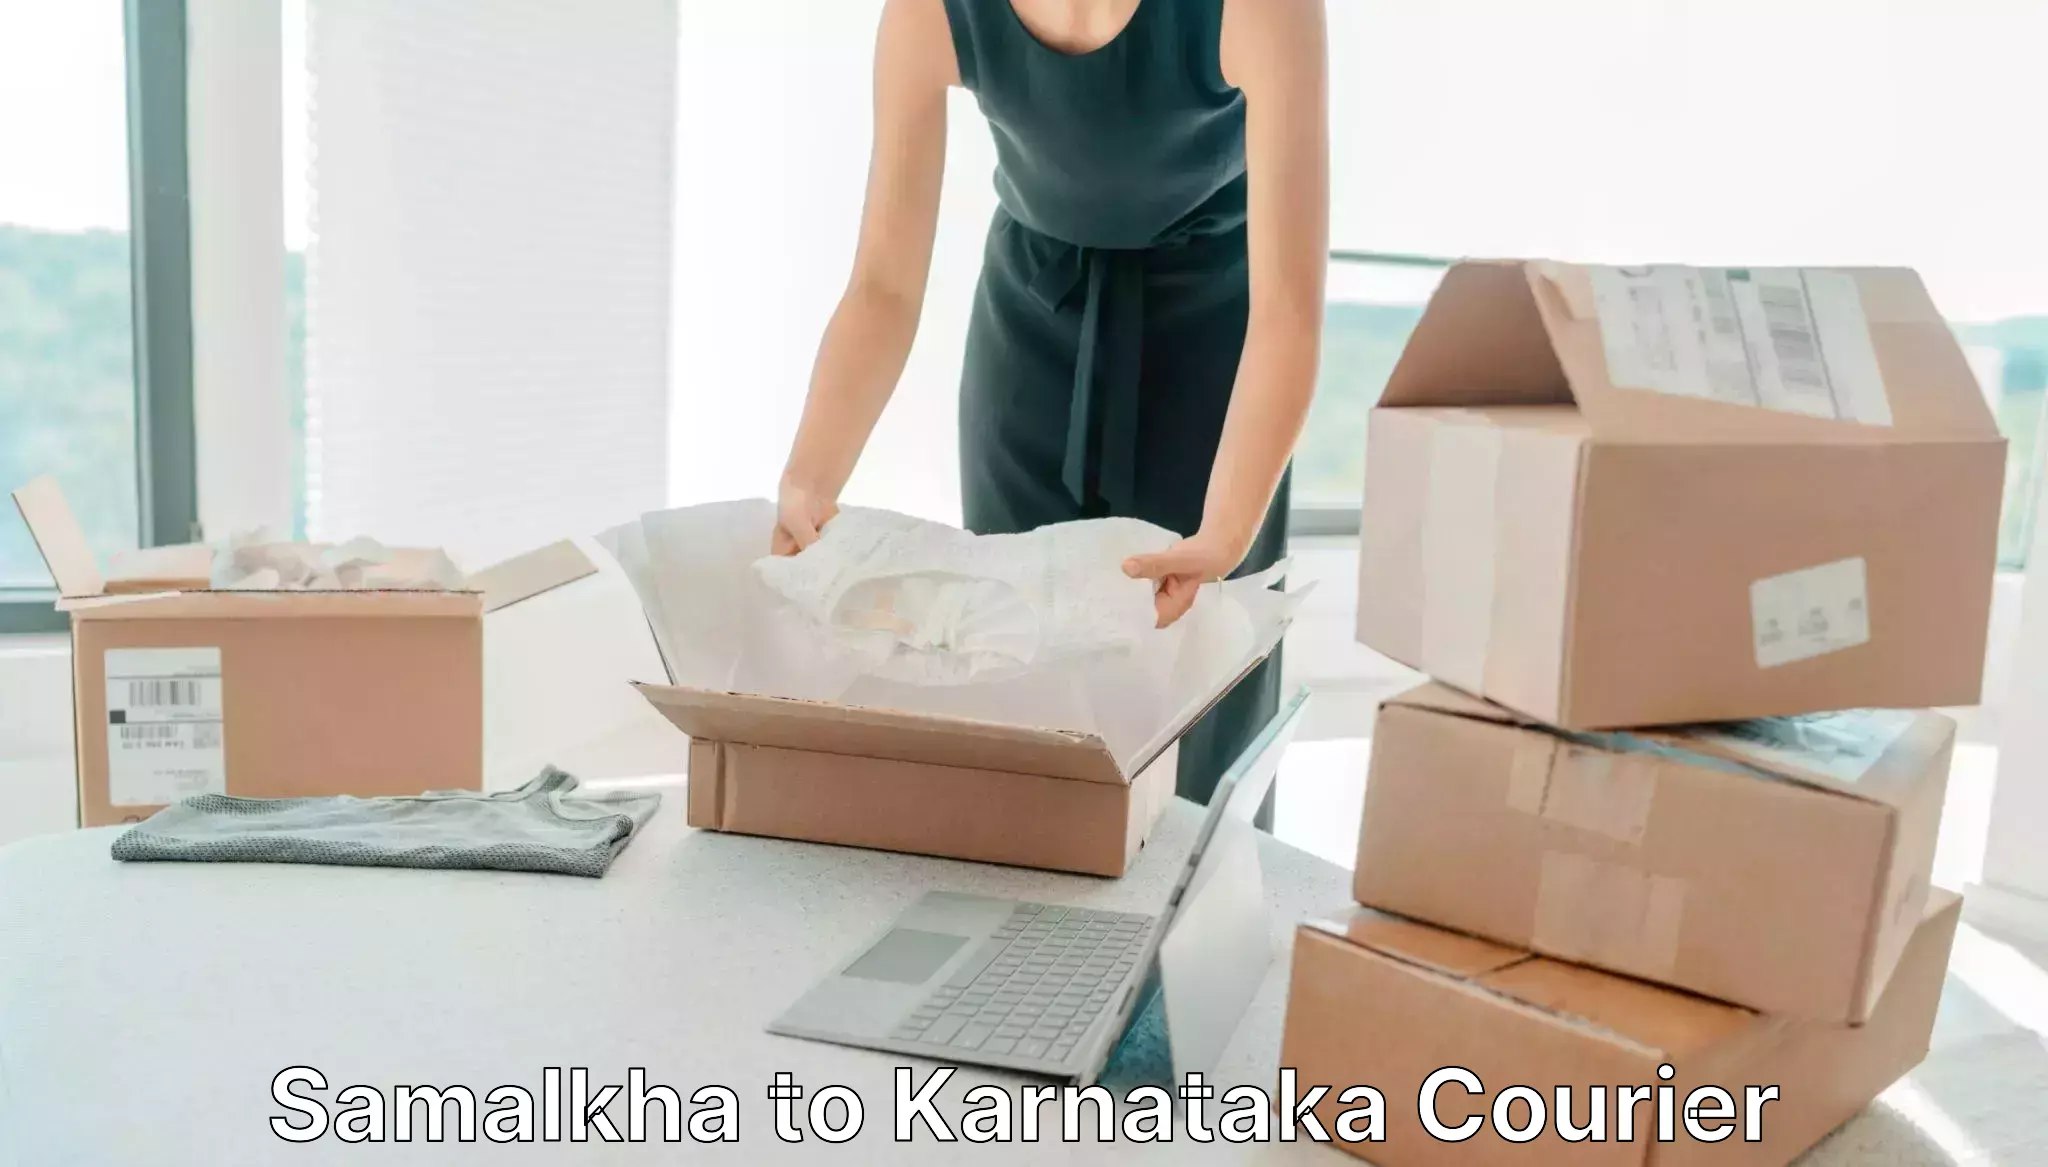 Professional parcel services Samalkha to Manipal Academy of Higher Education